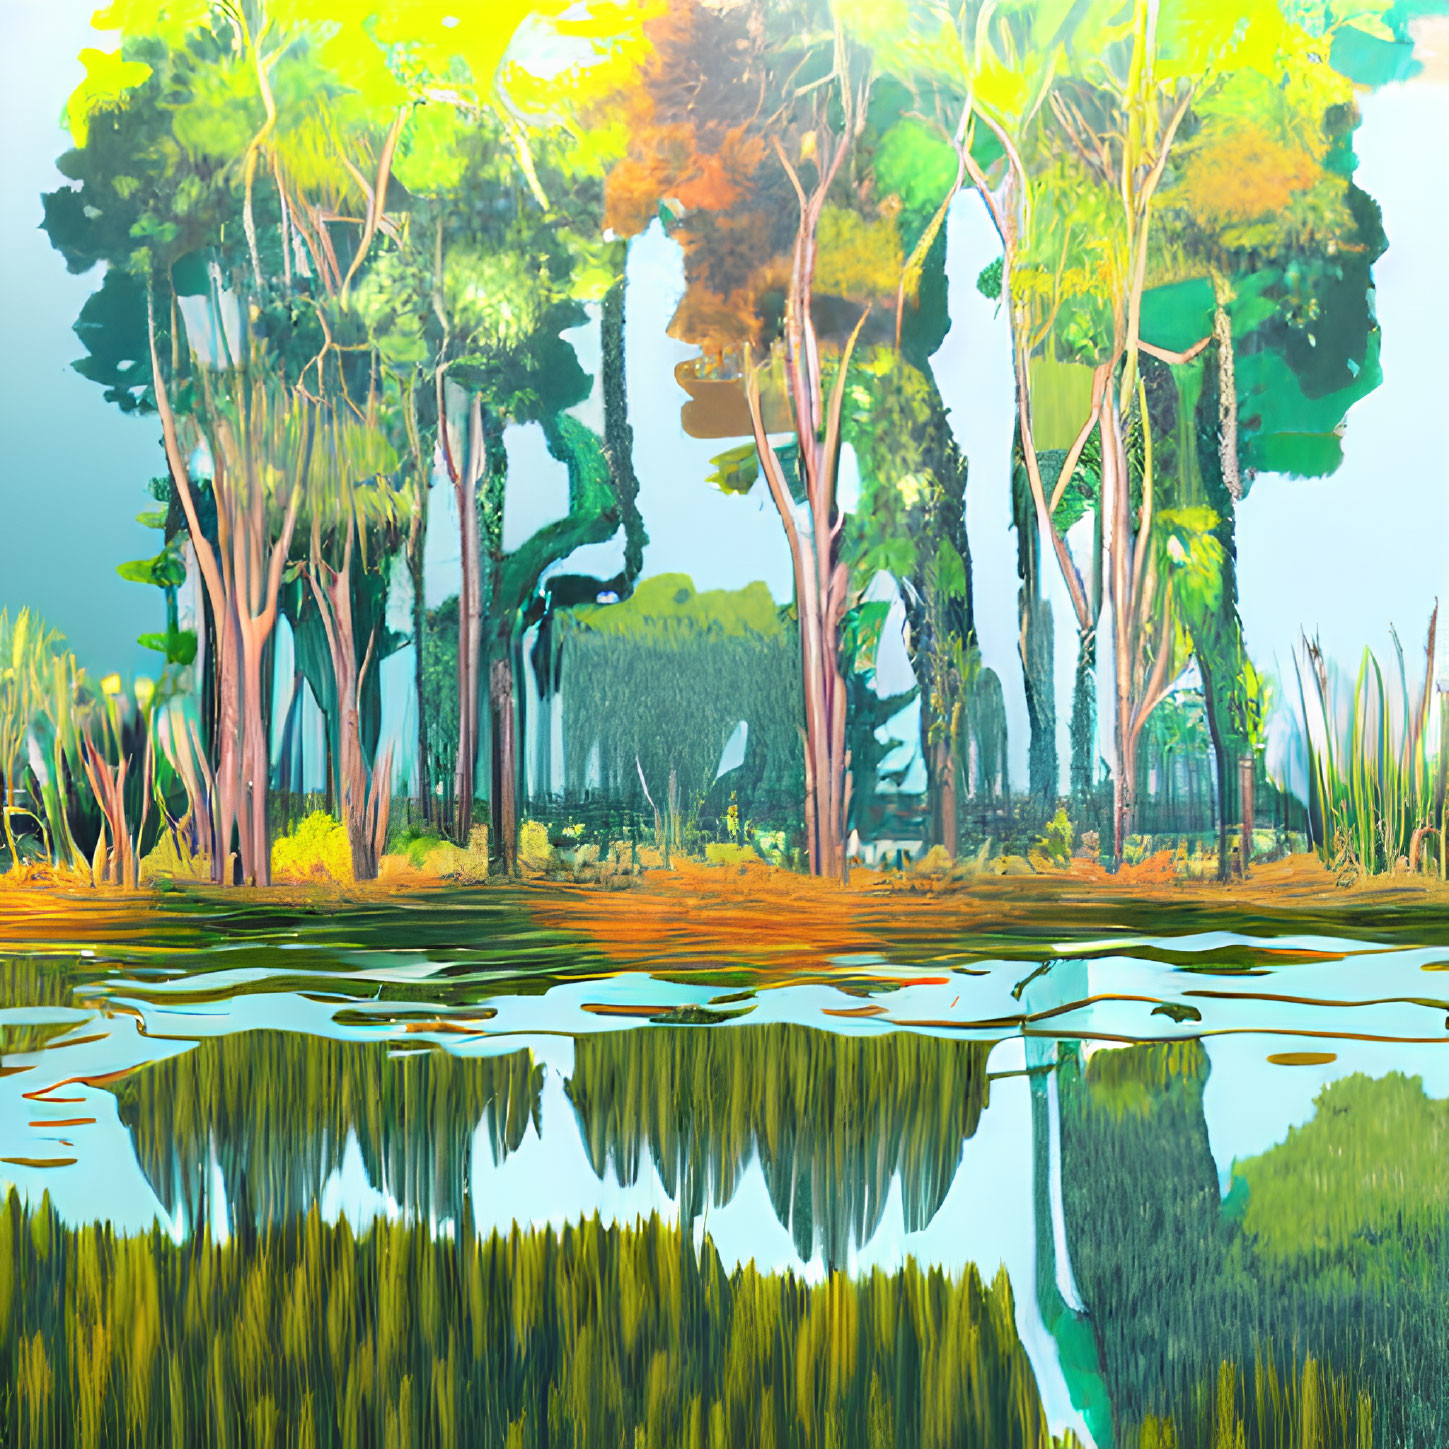 Stylized forest scene with lush greenery reflected on tranquil water surface